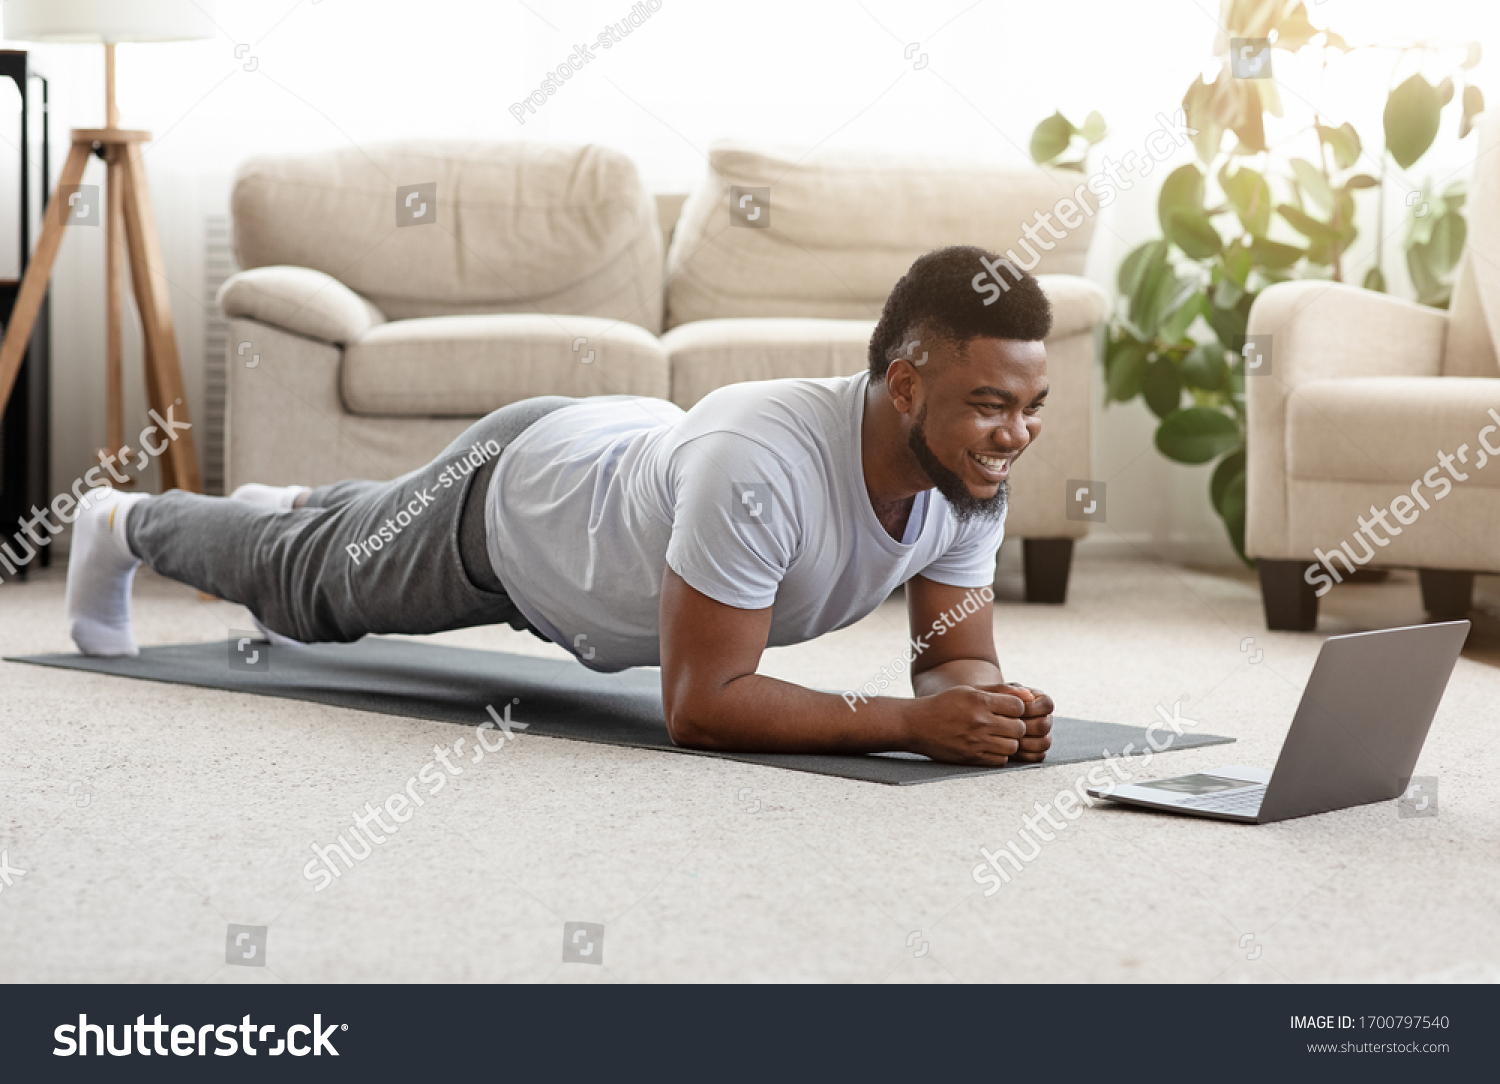 Training At Home. Sporty man doing yoga plank while watching online tutorial on laptop, exercising in living room, free space #1700797540